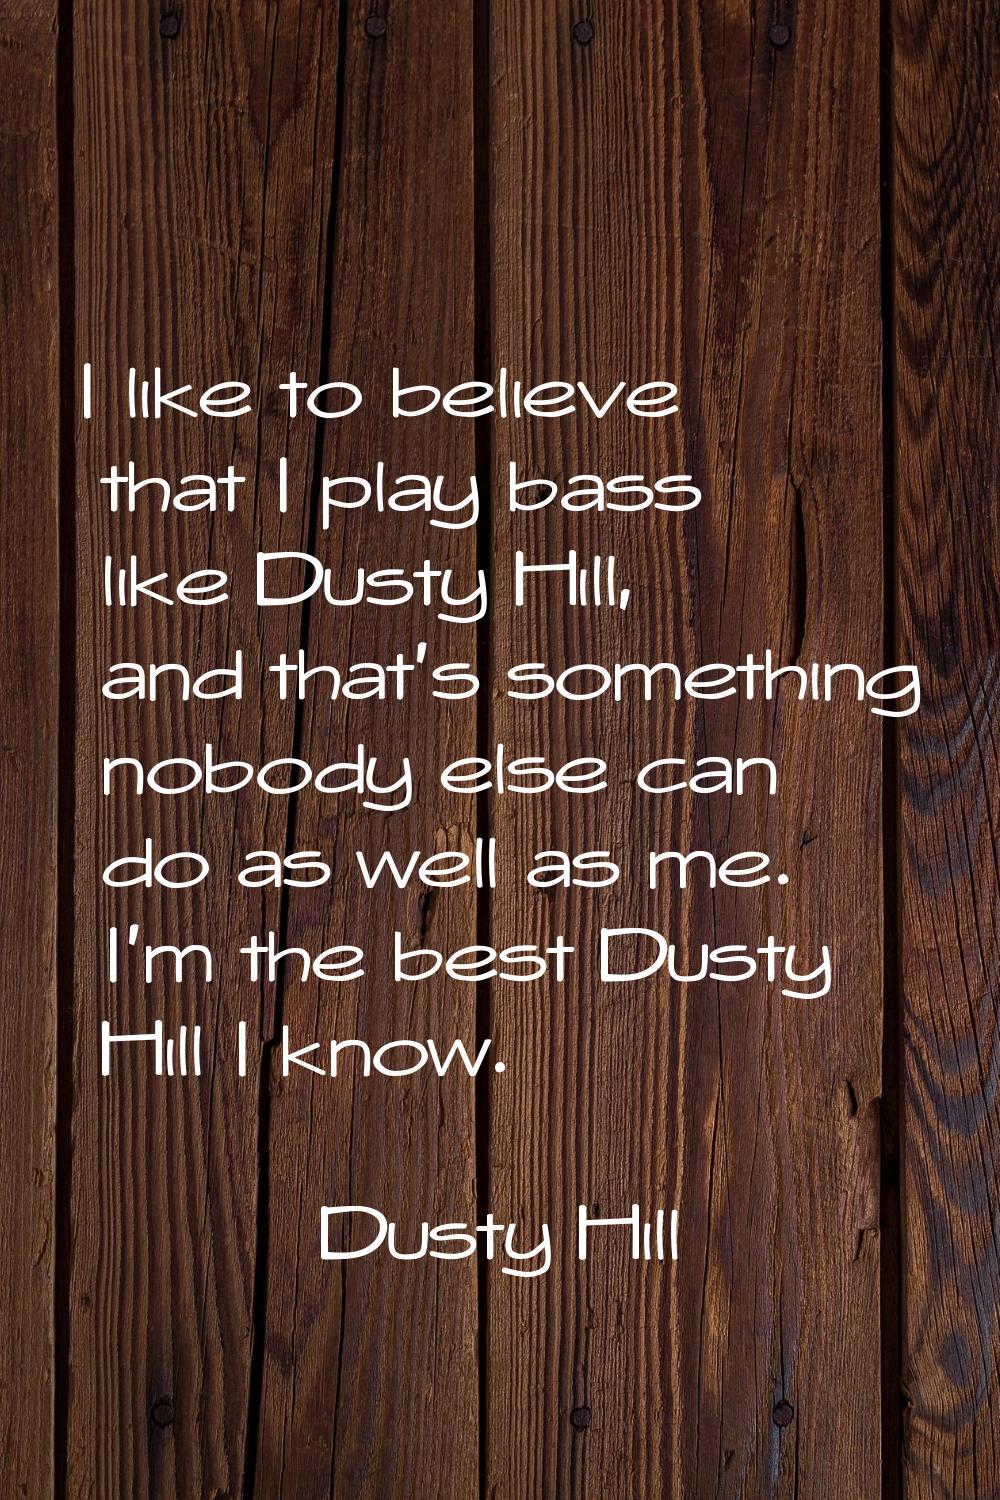 I like to believe that I play bass like Dusty Hill, and that's something nobody else can do as well